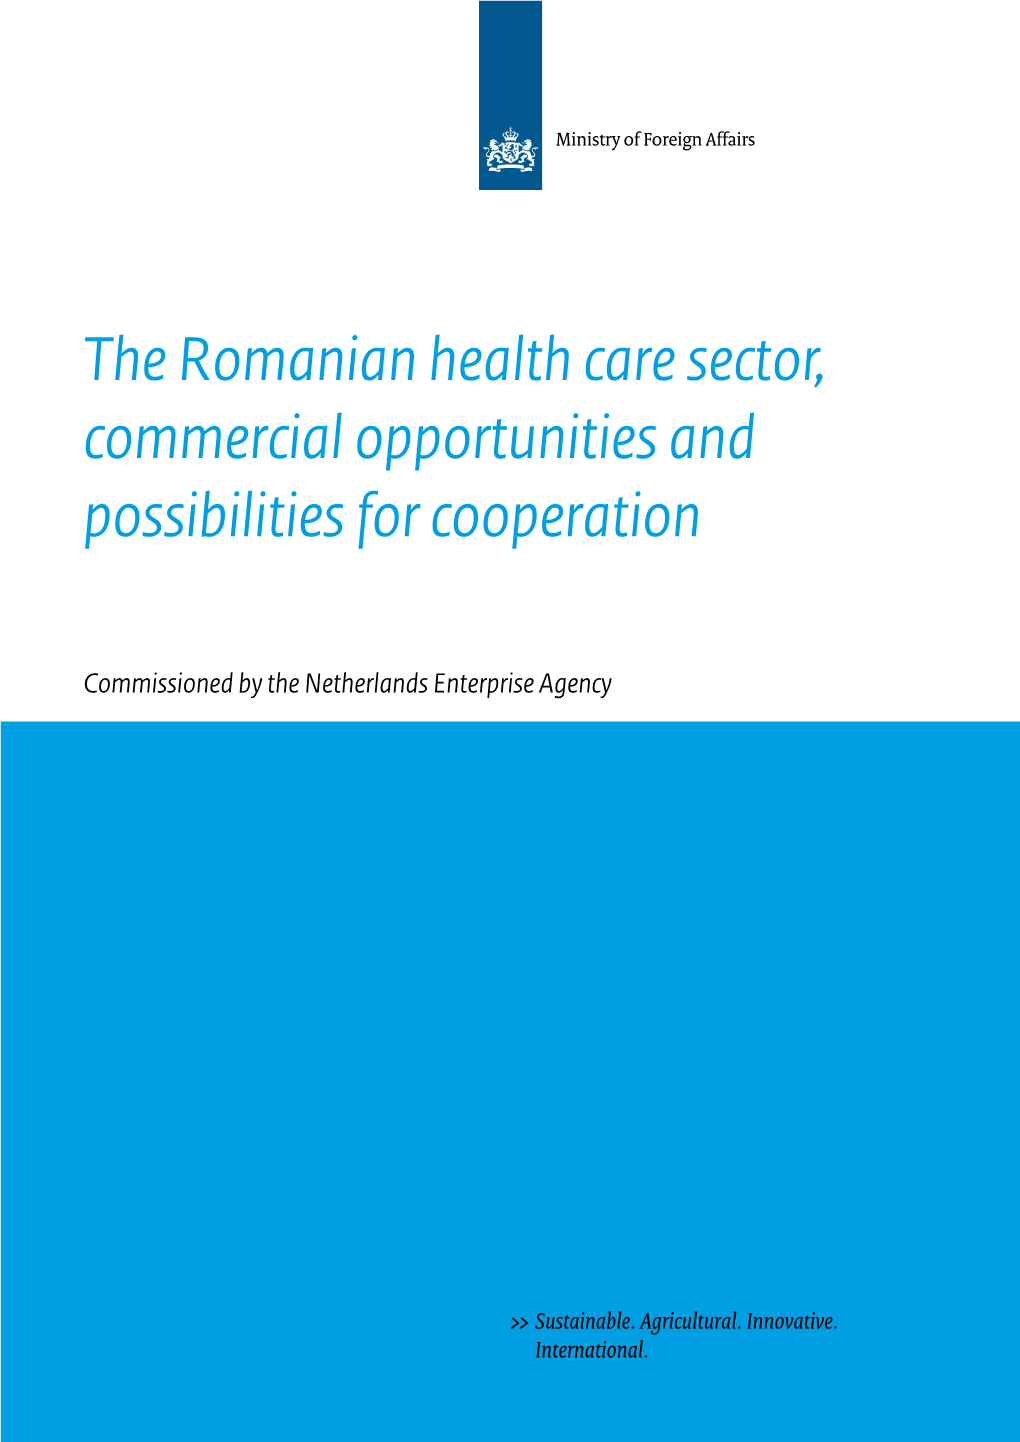 The Romanian Health Care Sector, Commercial Opportunities and Possibilities for Cooperation